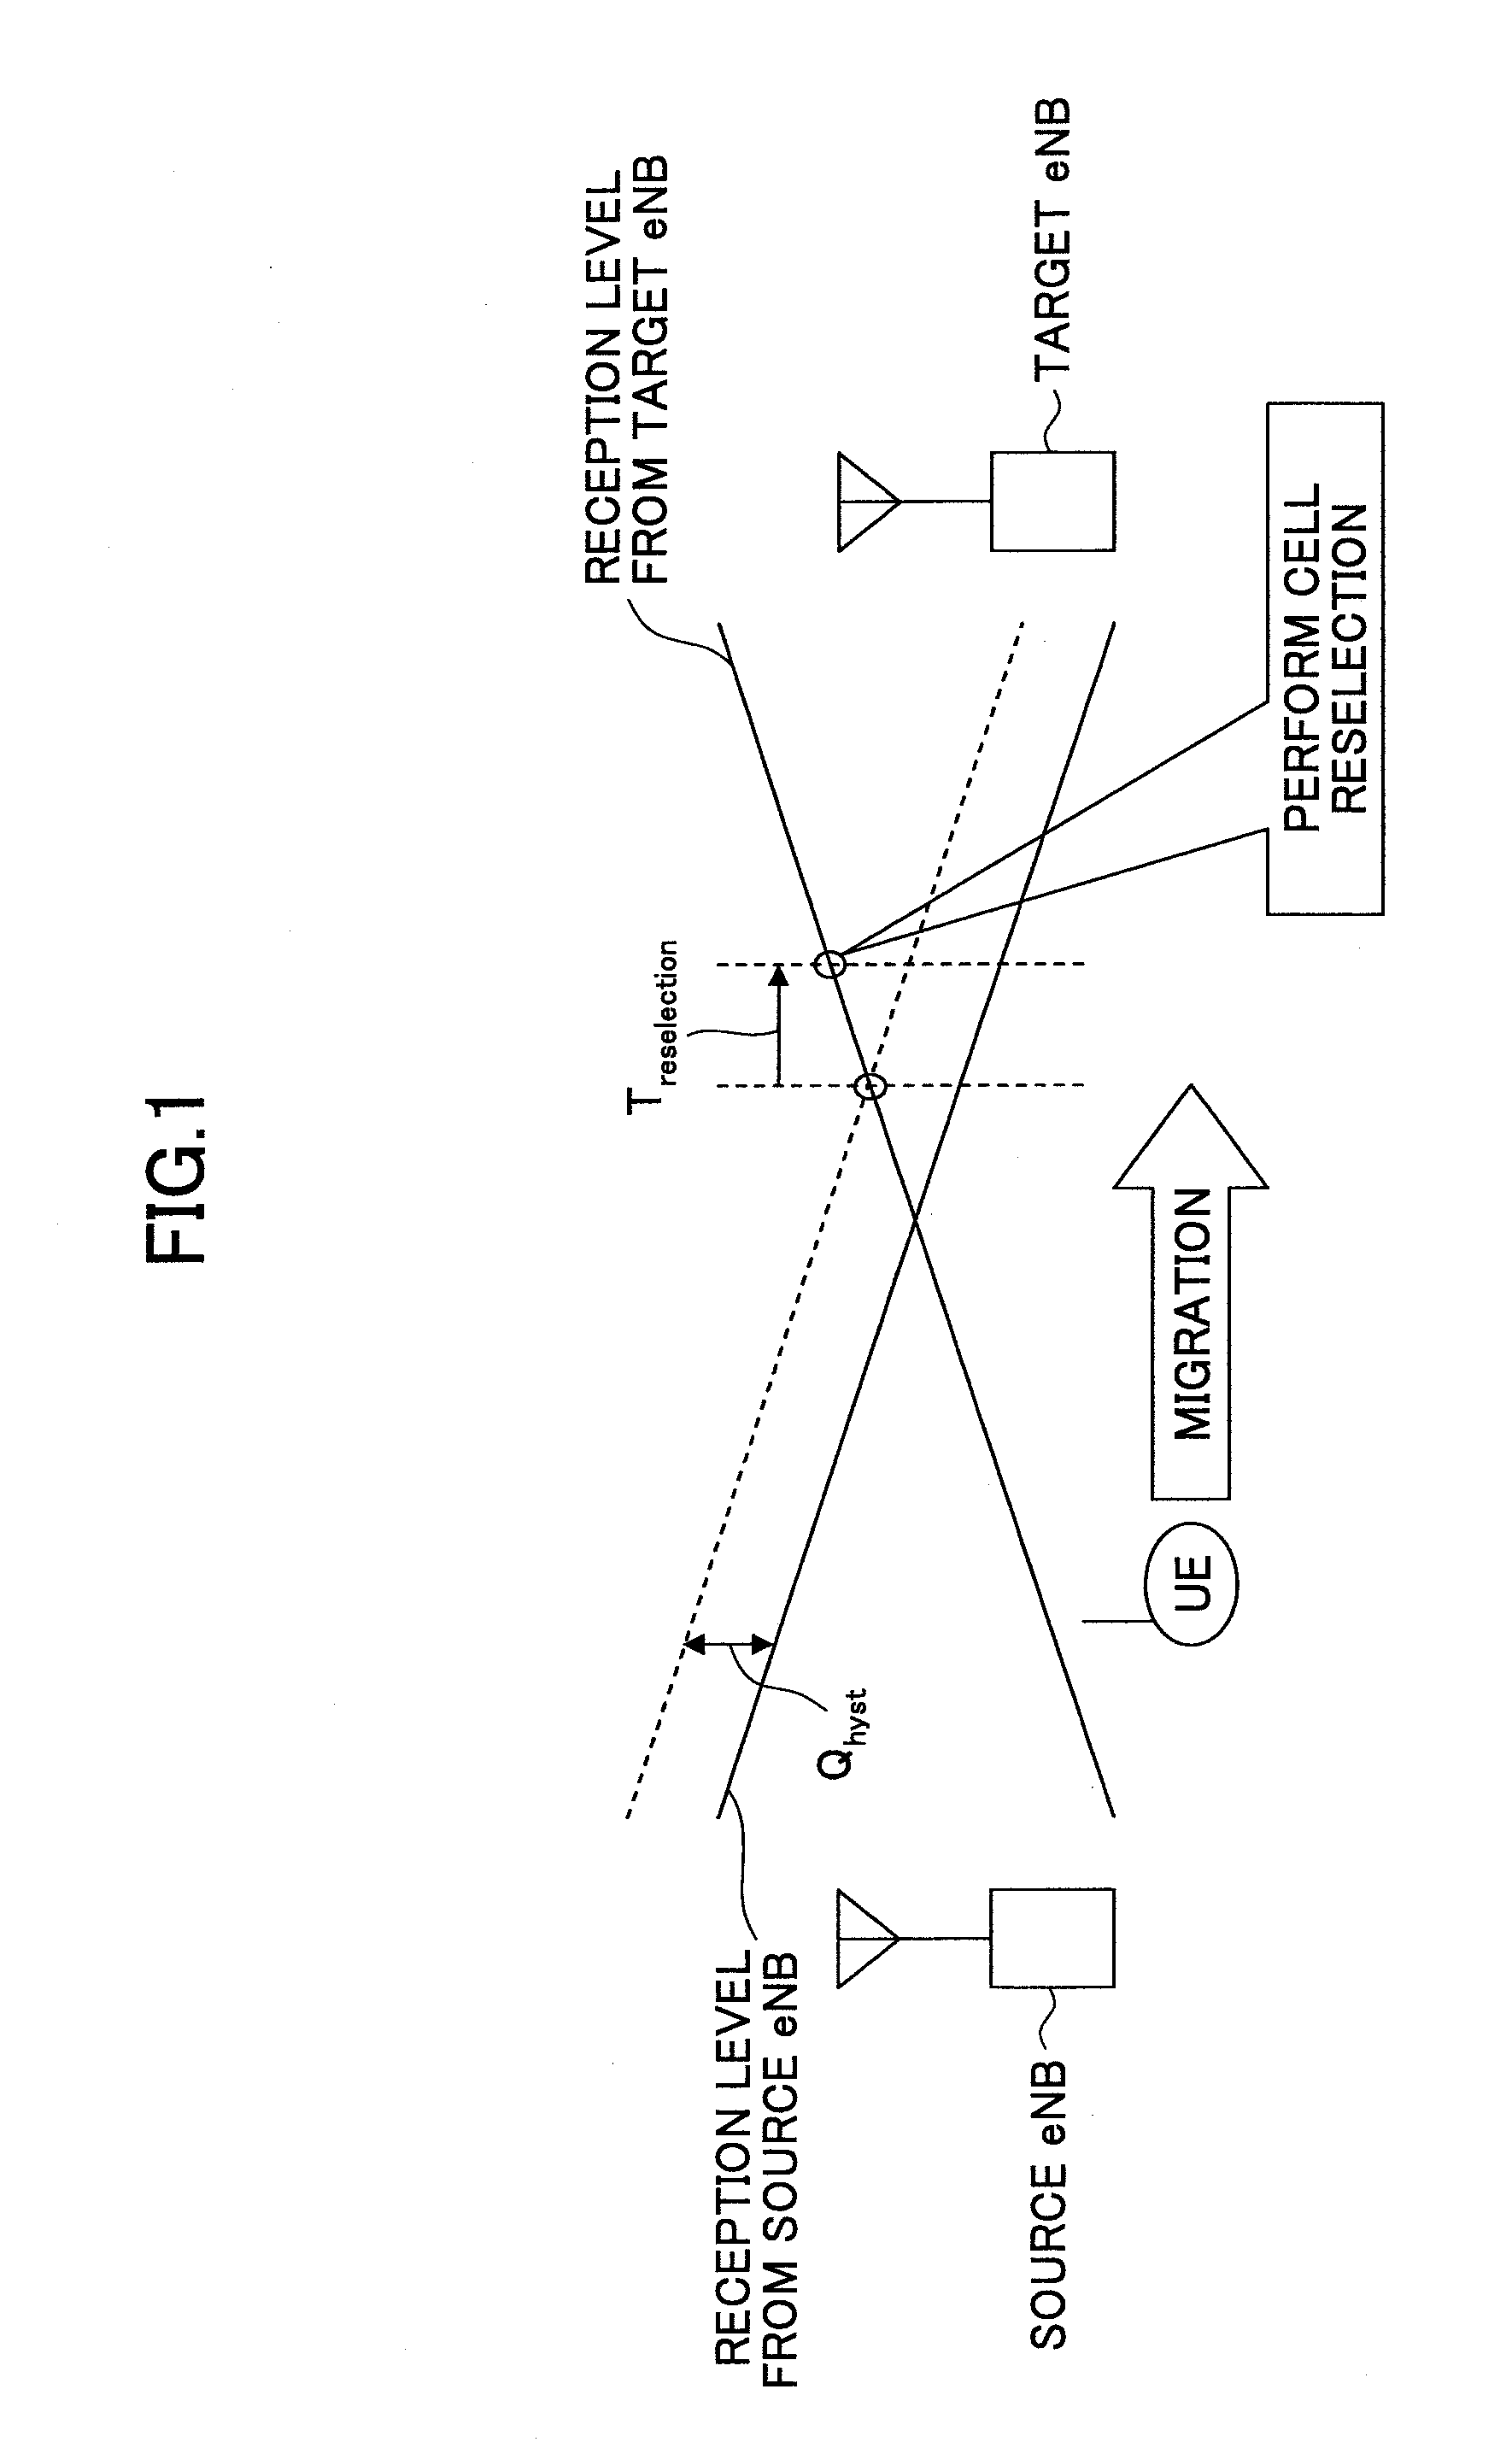 User apparatus and method in mobile communication system